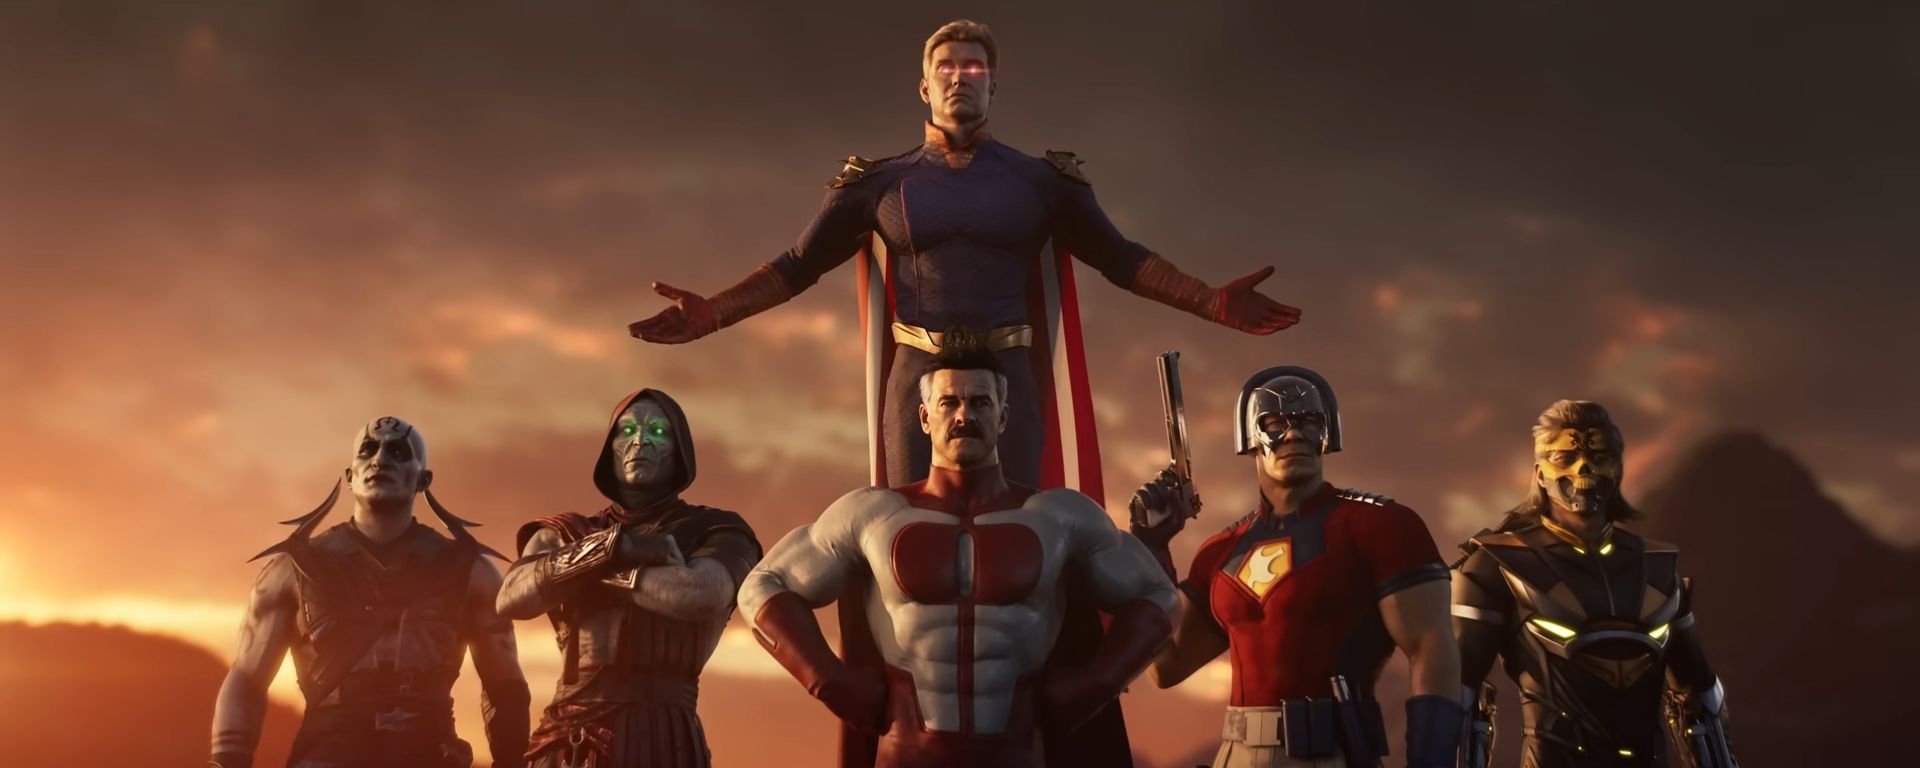 From the left to the right stand the following Mortal Kombat 1 characters: Quan-Chi, Ermac, Omni-Man, Peacemaker, and Takeda. Hovering above them is Homelander, with his arms wide open.